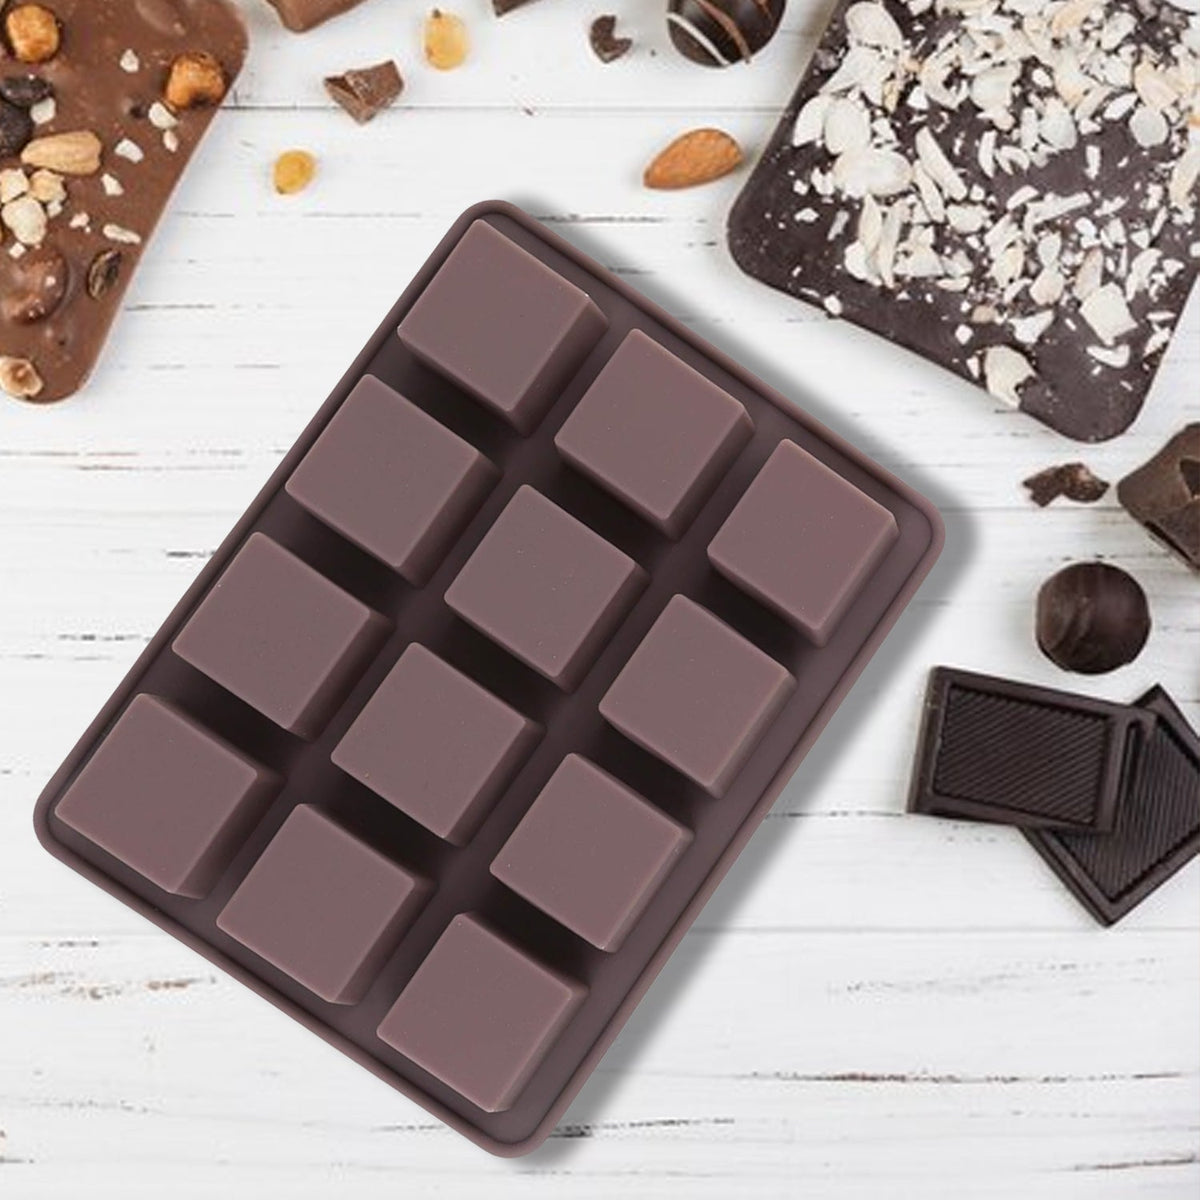 8185 Silicone Chocolate Mould 12 Cavity Square Shape Mould Candy Mold Baking Tools For Cake Chocolate, Food Grade Non-Stick Reusable, Baking Trays (1 pc)